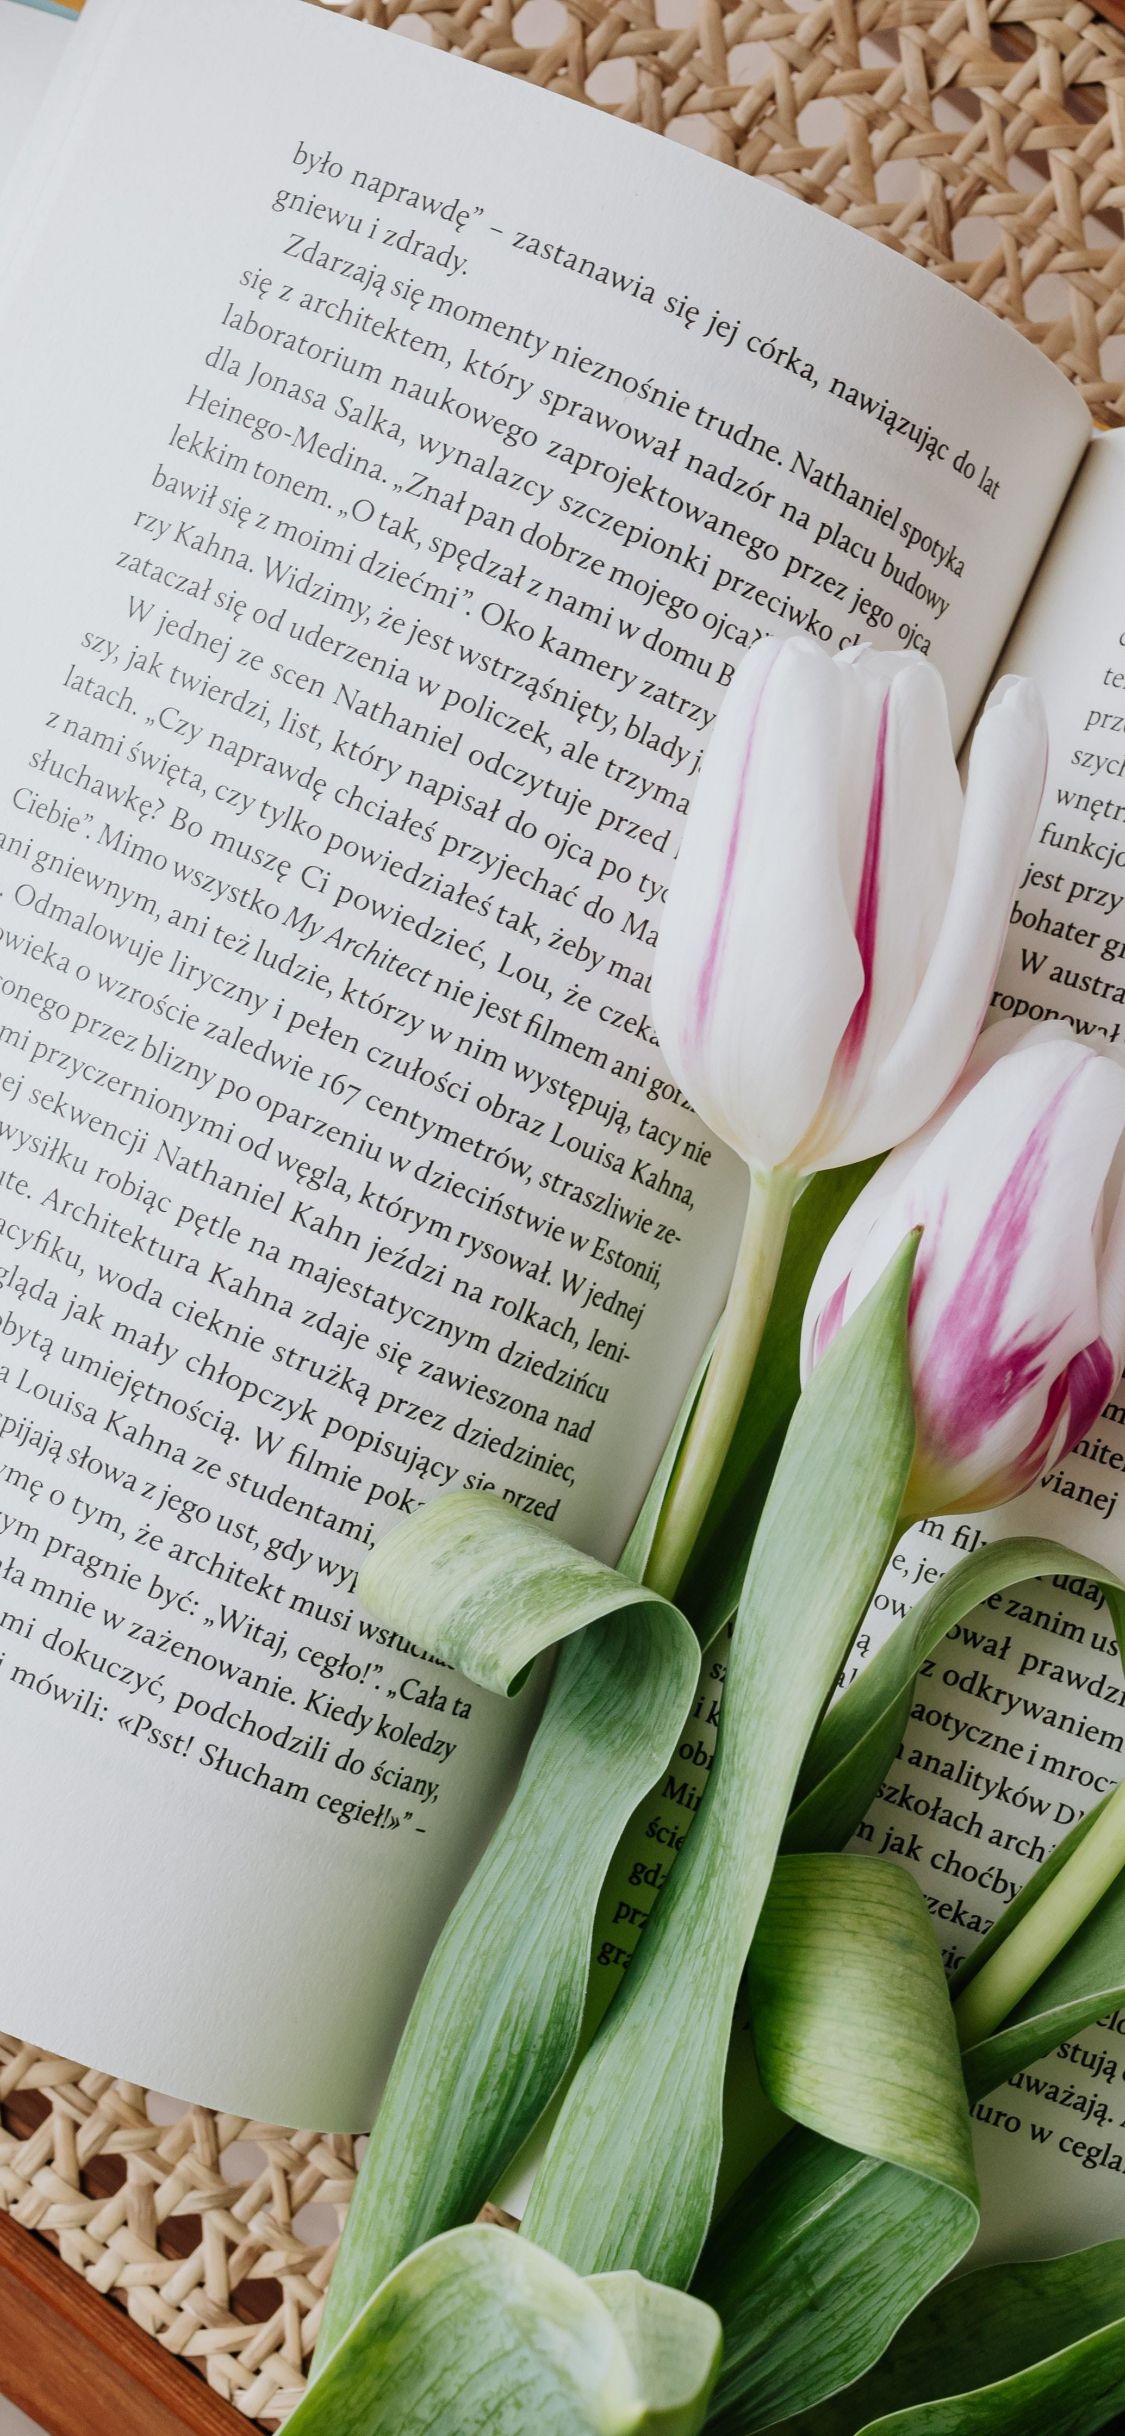 Flowers and book, reading wallpaper. Reading wallpaper, Flower wallpaper, Book wallpaper